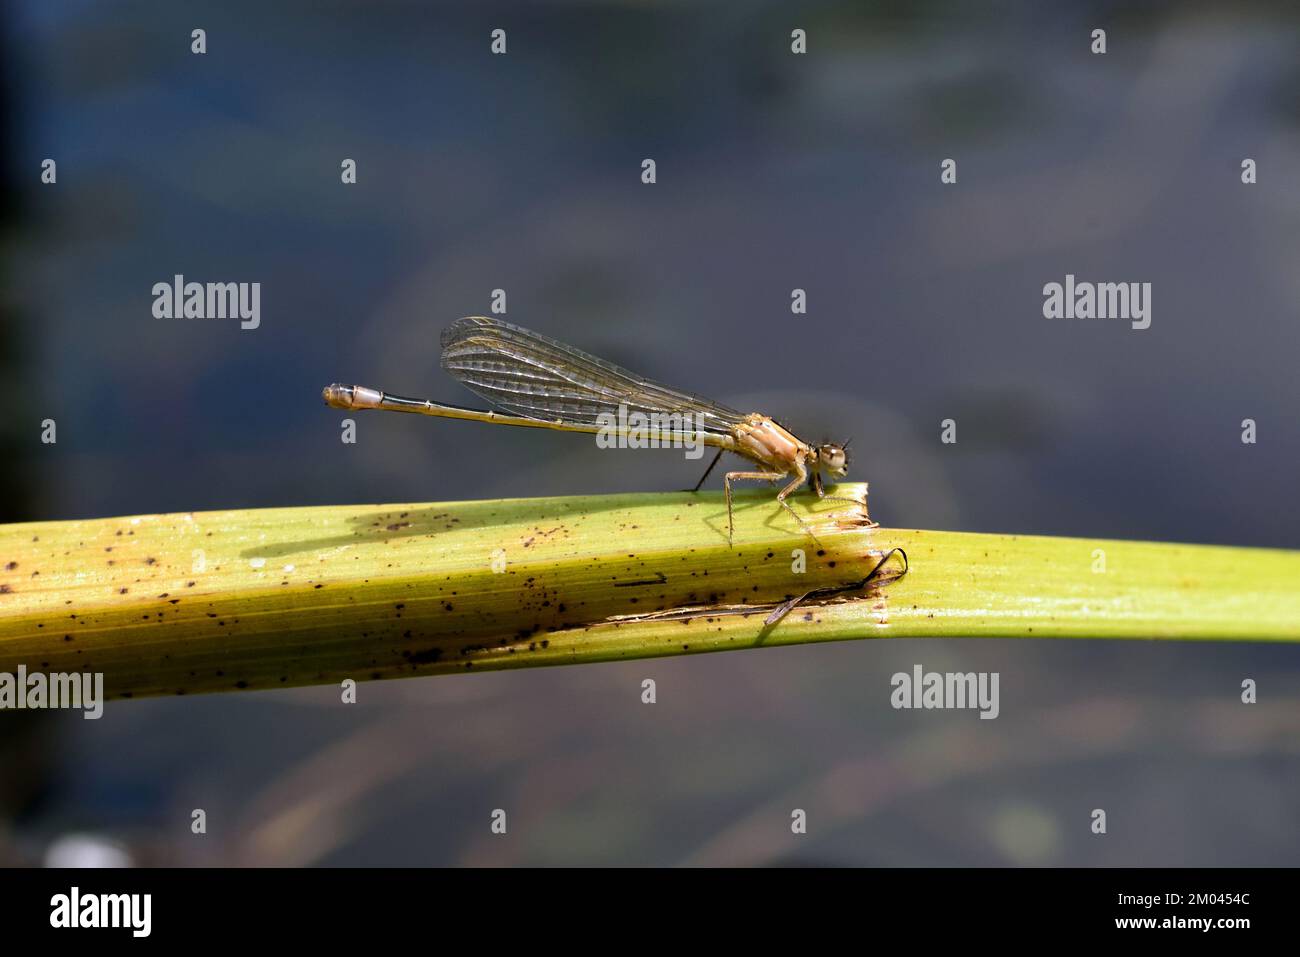 A newly emerged Common Blue Damselfly (Enallagma cyathigerum) resting on the stem of an aquatic plant growing in a pond in Southern England Stock Photo